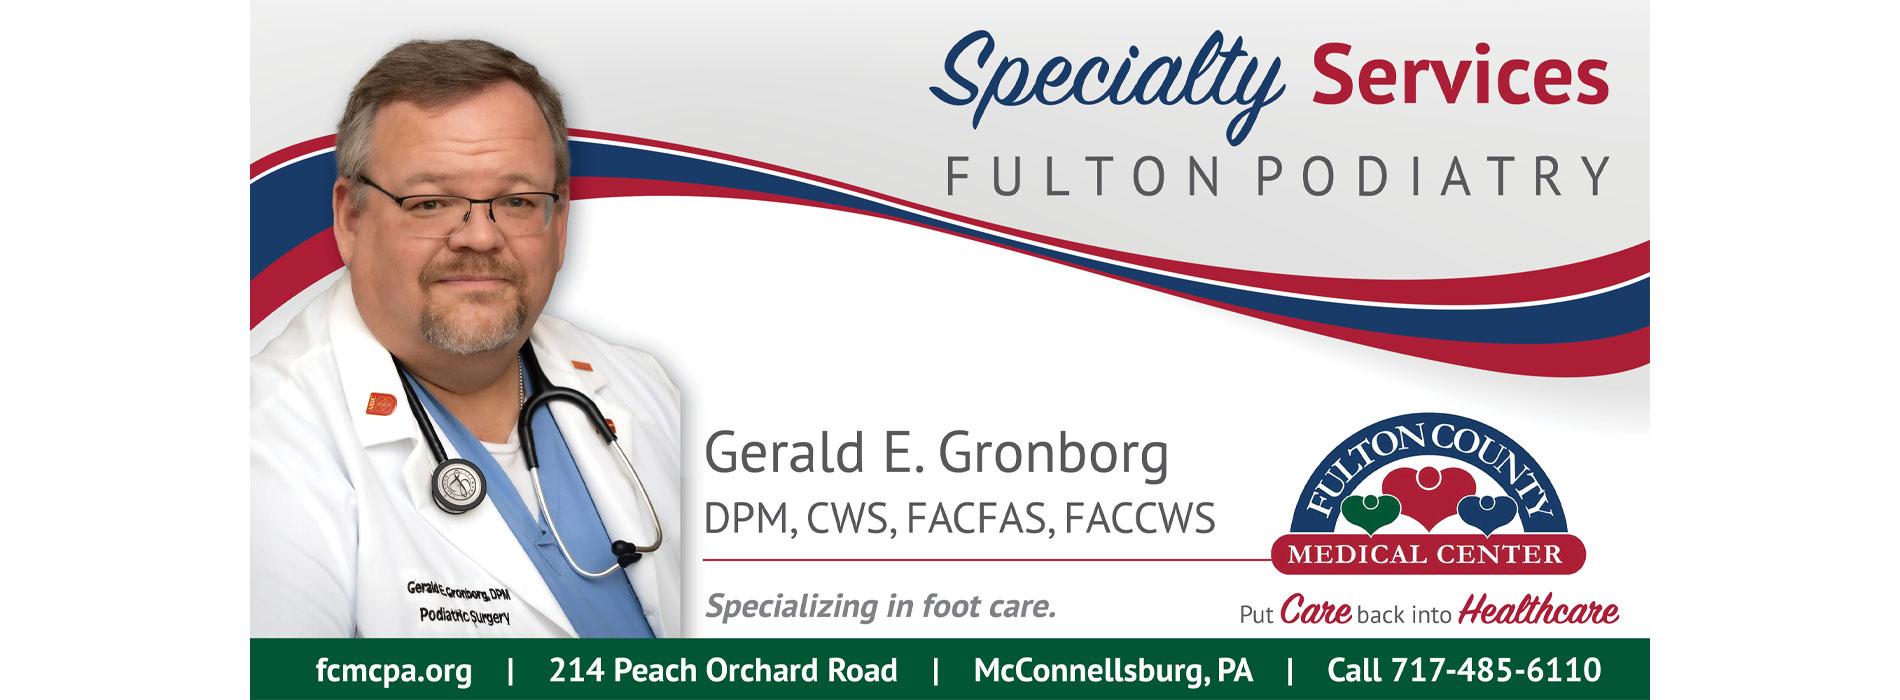 Specialty Services Fulton Podiatry 
Gerald E. Gronborg
DPM, CWS, FACAS, FACCWS 
Specializing in foot care.

fcmpa.org
214 Peach Orchard Road
McConnellsburg, PA
Call 717-485-6110